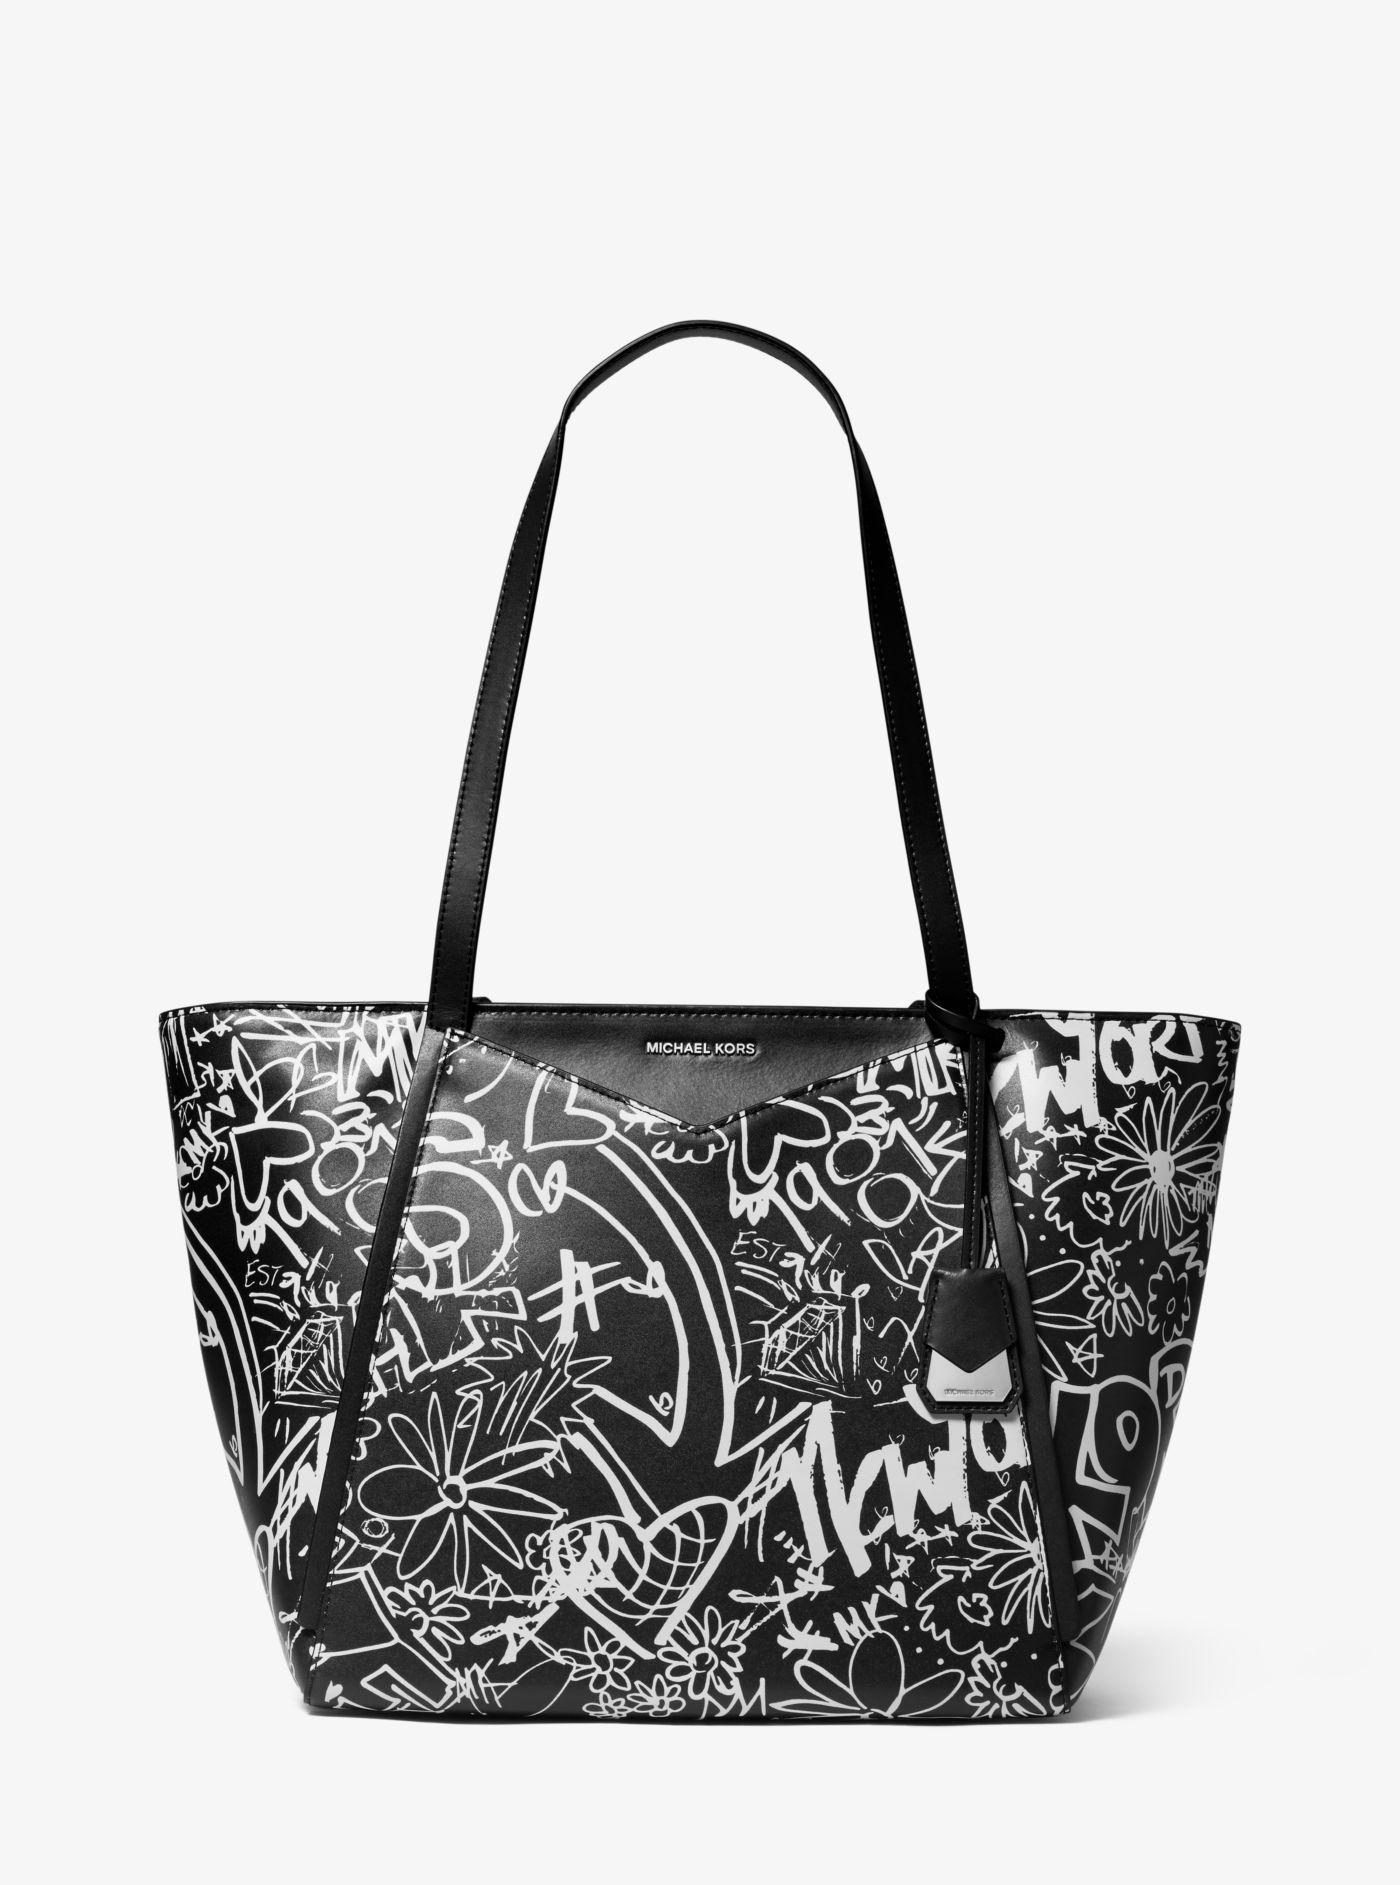 Michael Kors Whitney Large Graffiti Leather Tote in Black - Lyst